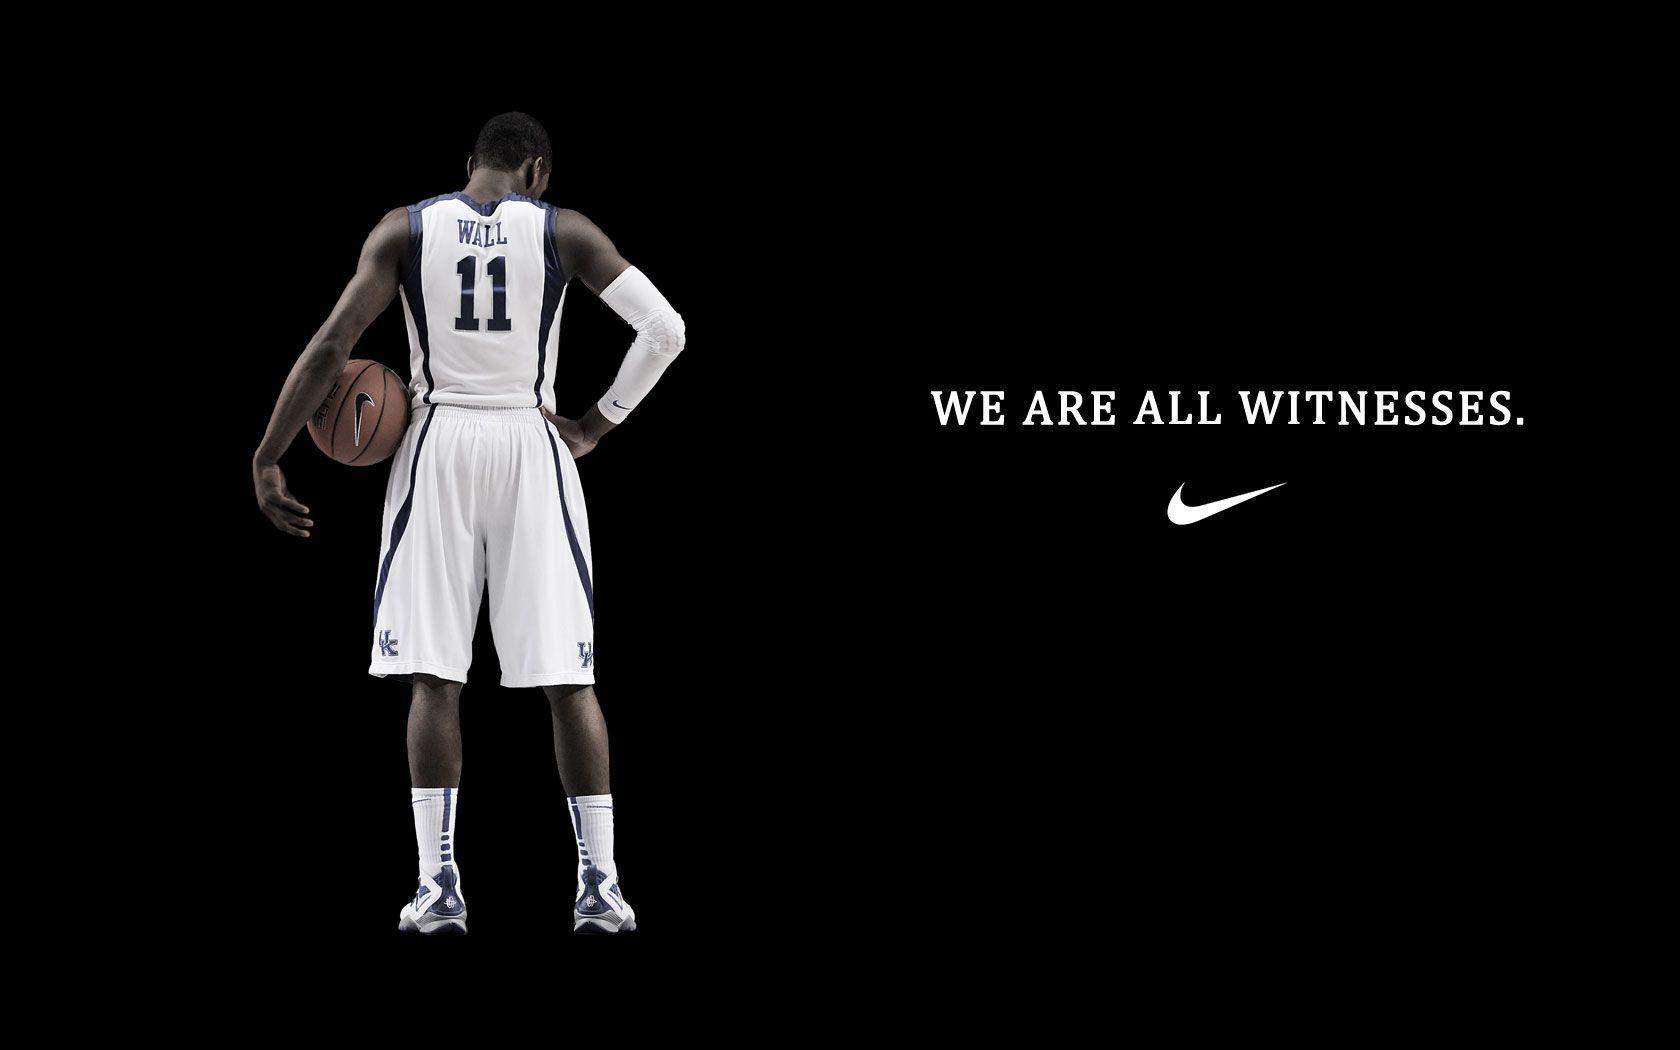 Nike Basketball Wallpapers For - Wallpaper Cave